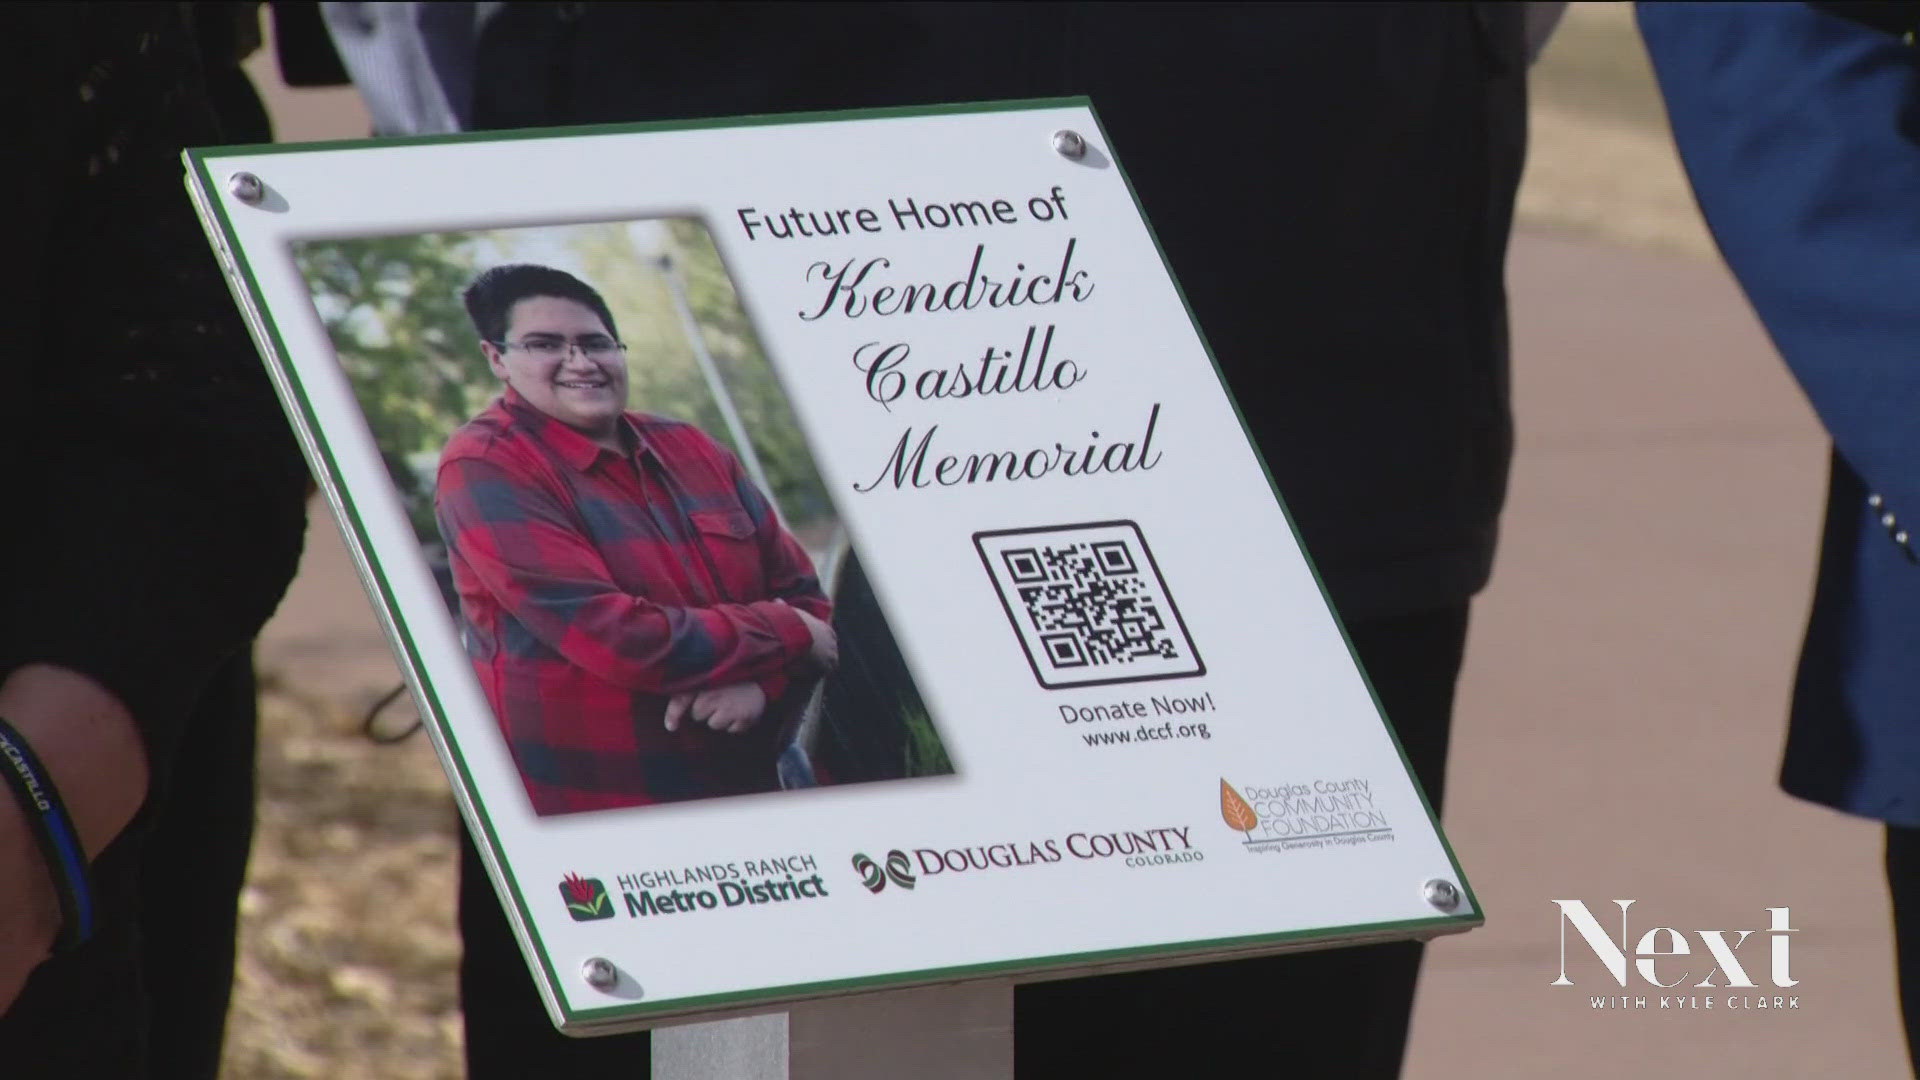 Kendrick Castillo rushed two shooters at STEM School Highlands Ranch, losing his life to save his friends.